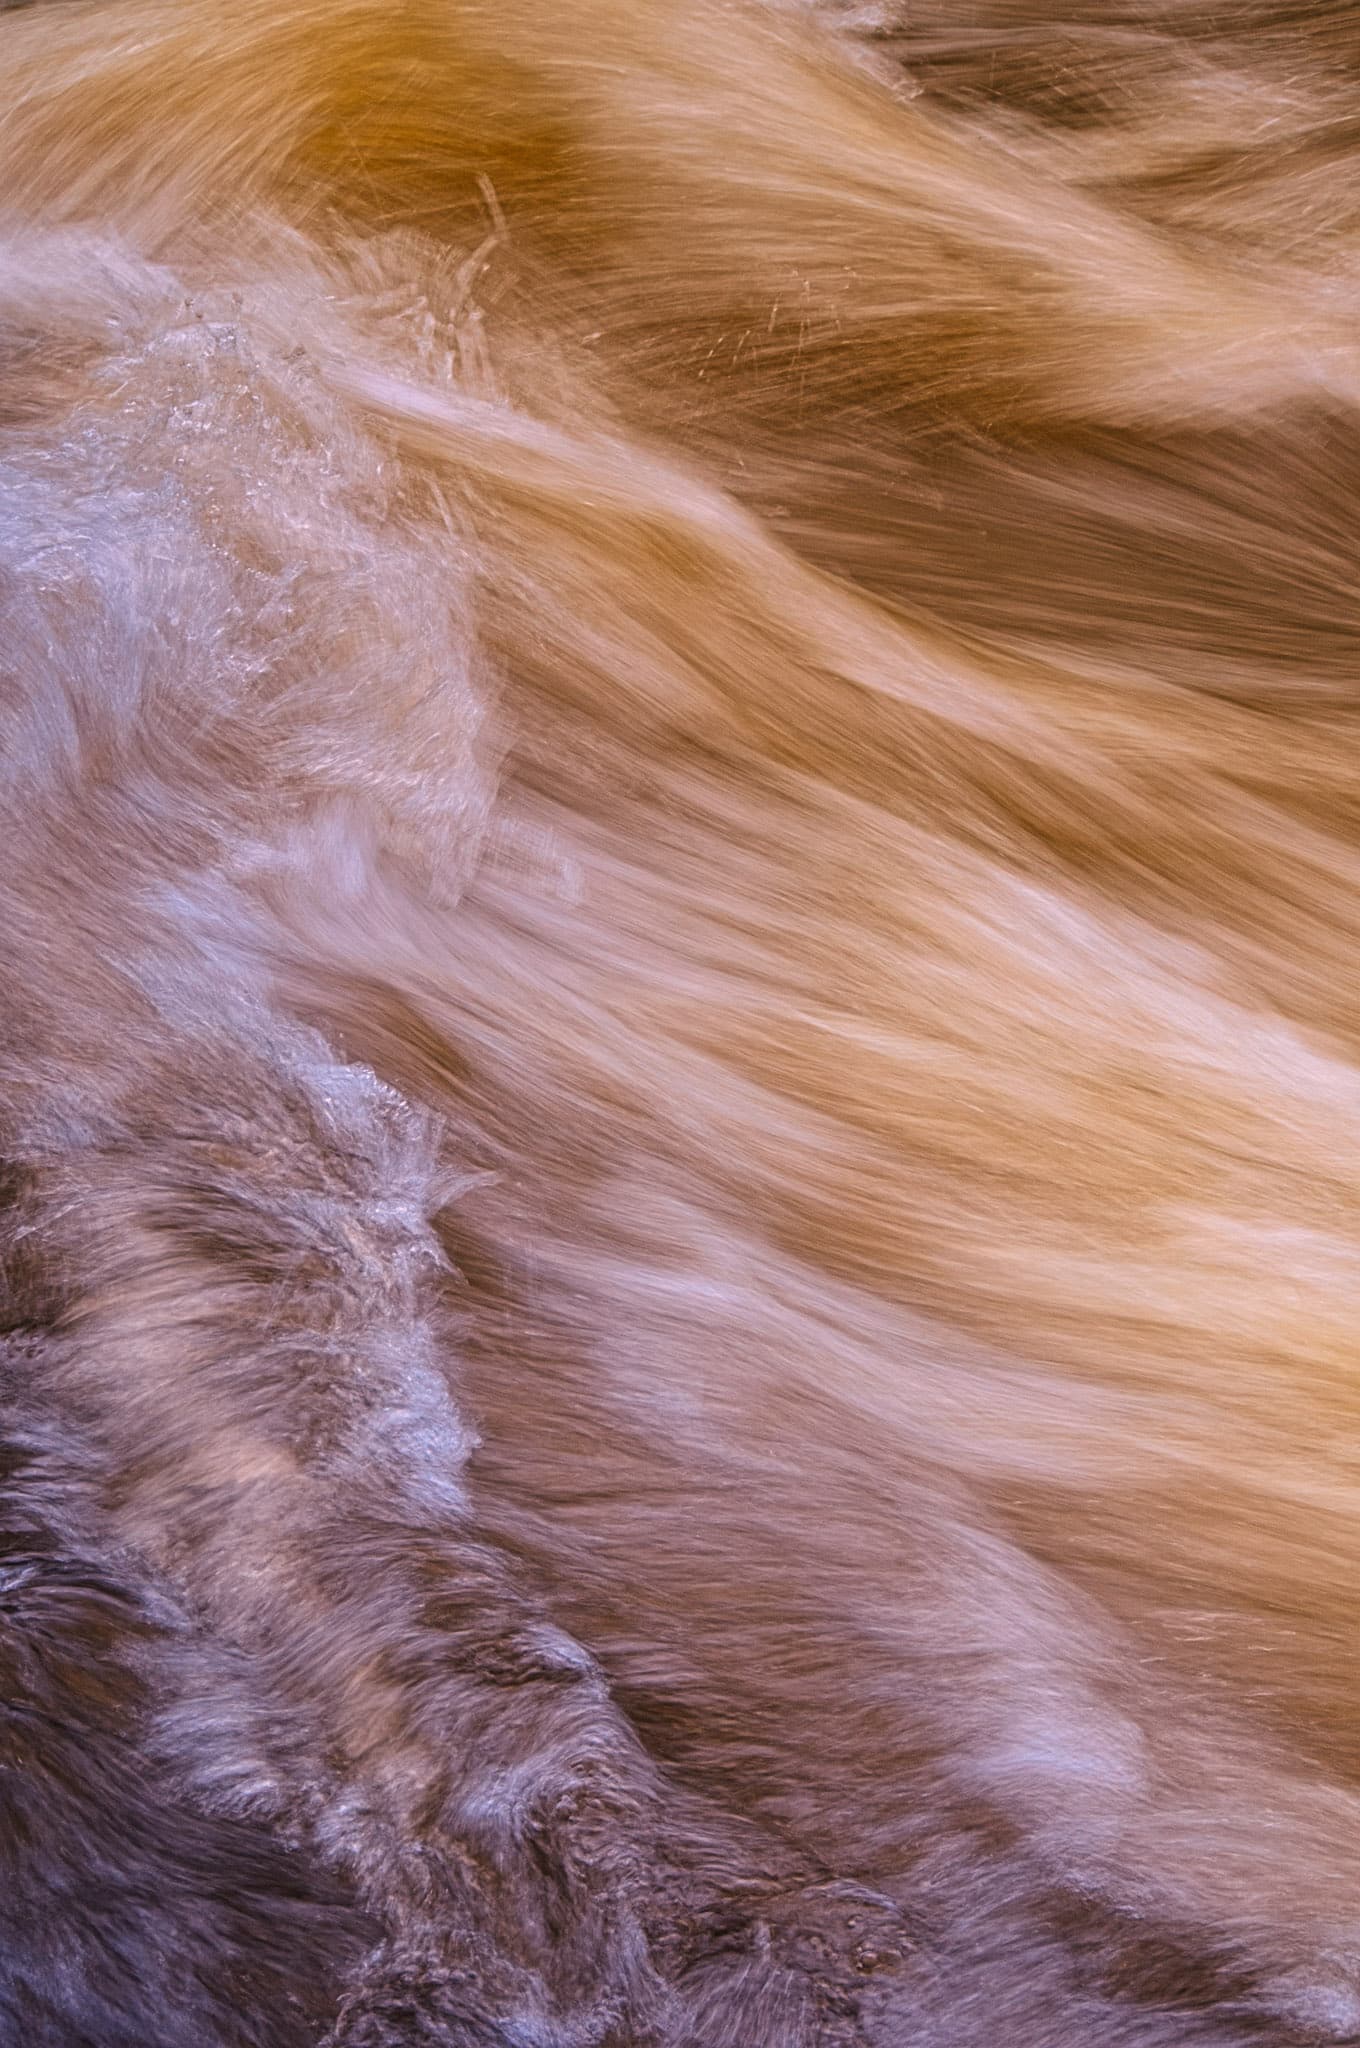 Summer rains cause Boulder Creek to flow swiftly, This is a long exposure closeup of the flowing water.